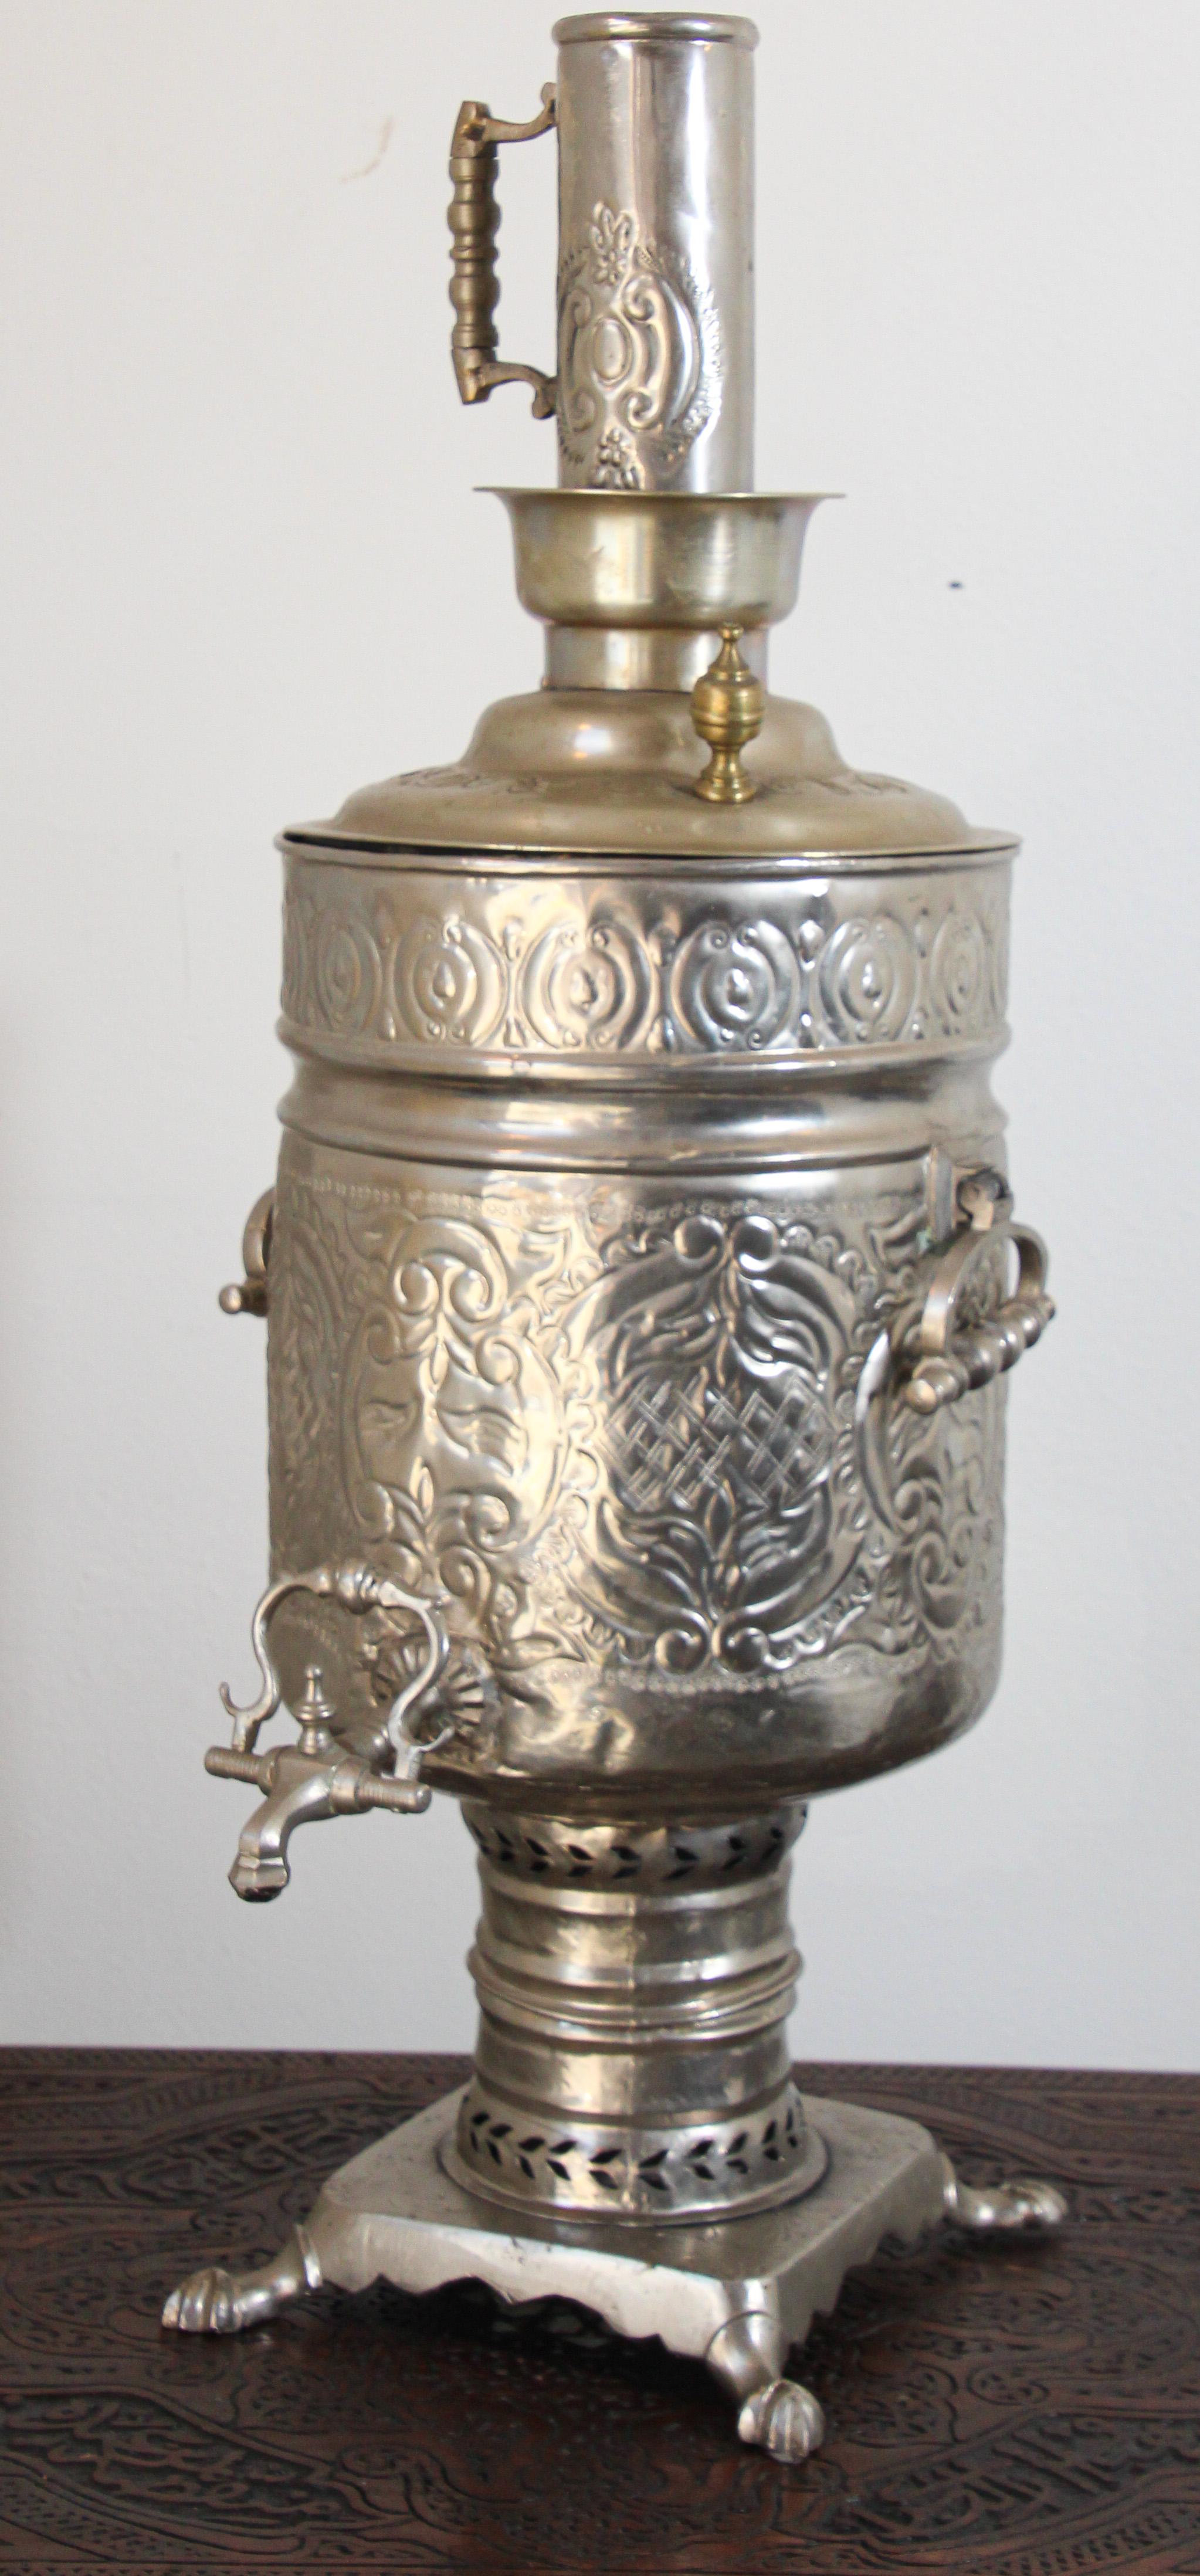 Exceptional hand-crafted Moroccan samovar with etched and embossed floral designs.
Middle Eastern, Islamic style Moorish samovar tea kettle handcrafted in Fez, Morocco.
Brass and silver plated. 
For decoration only.
Measures: Stand is 9